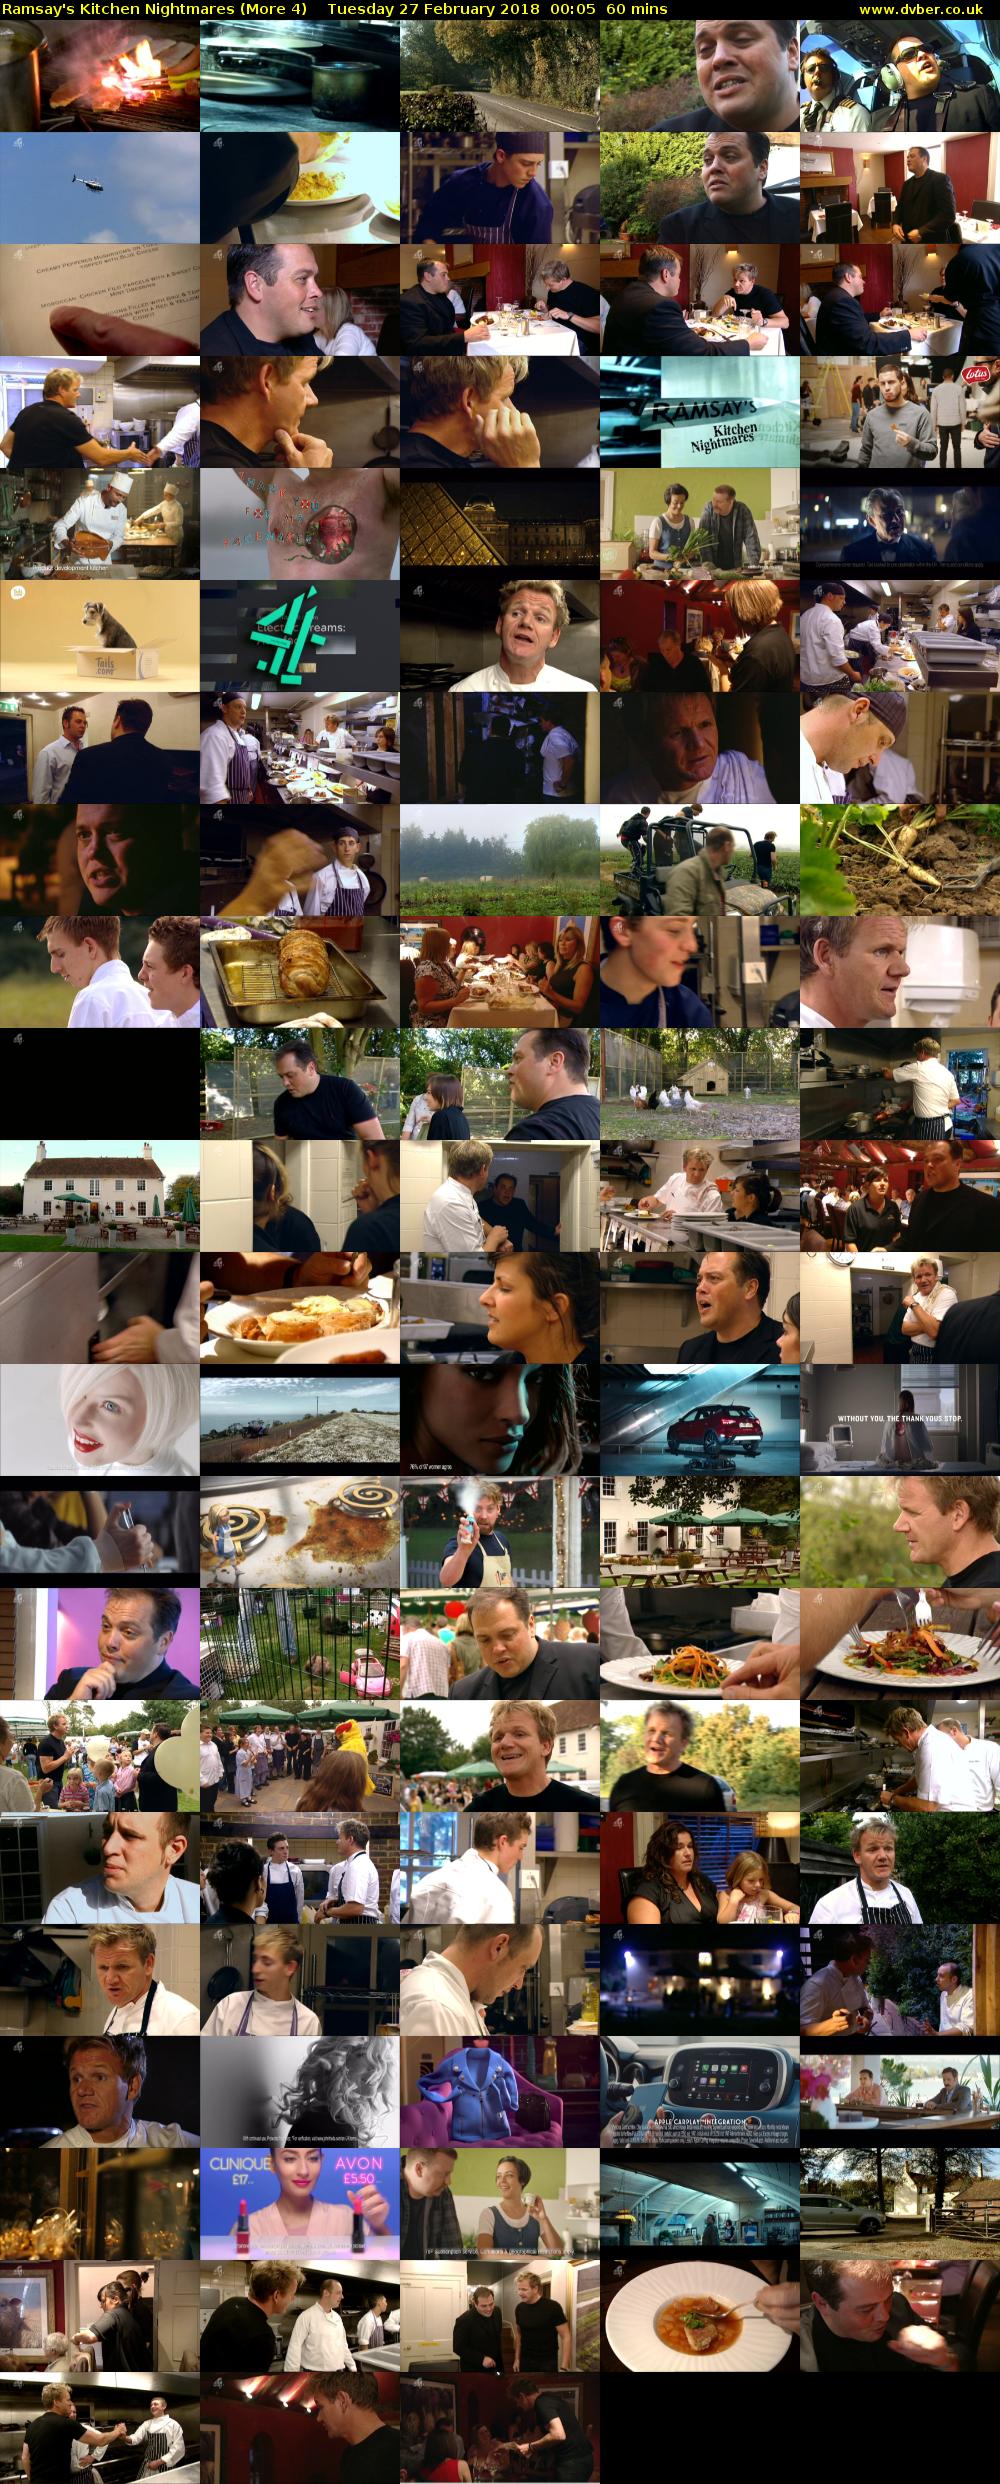 Ramsay's Kitchen Nightmares (More 4) Tuesday 27 February 2018 00:05 - 01:05